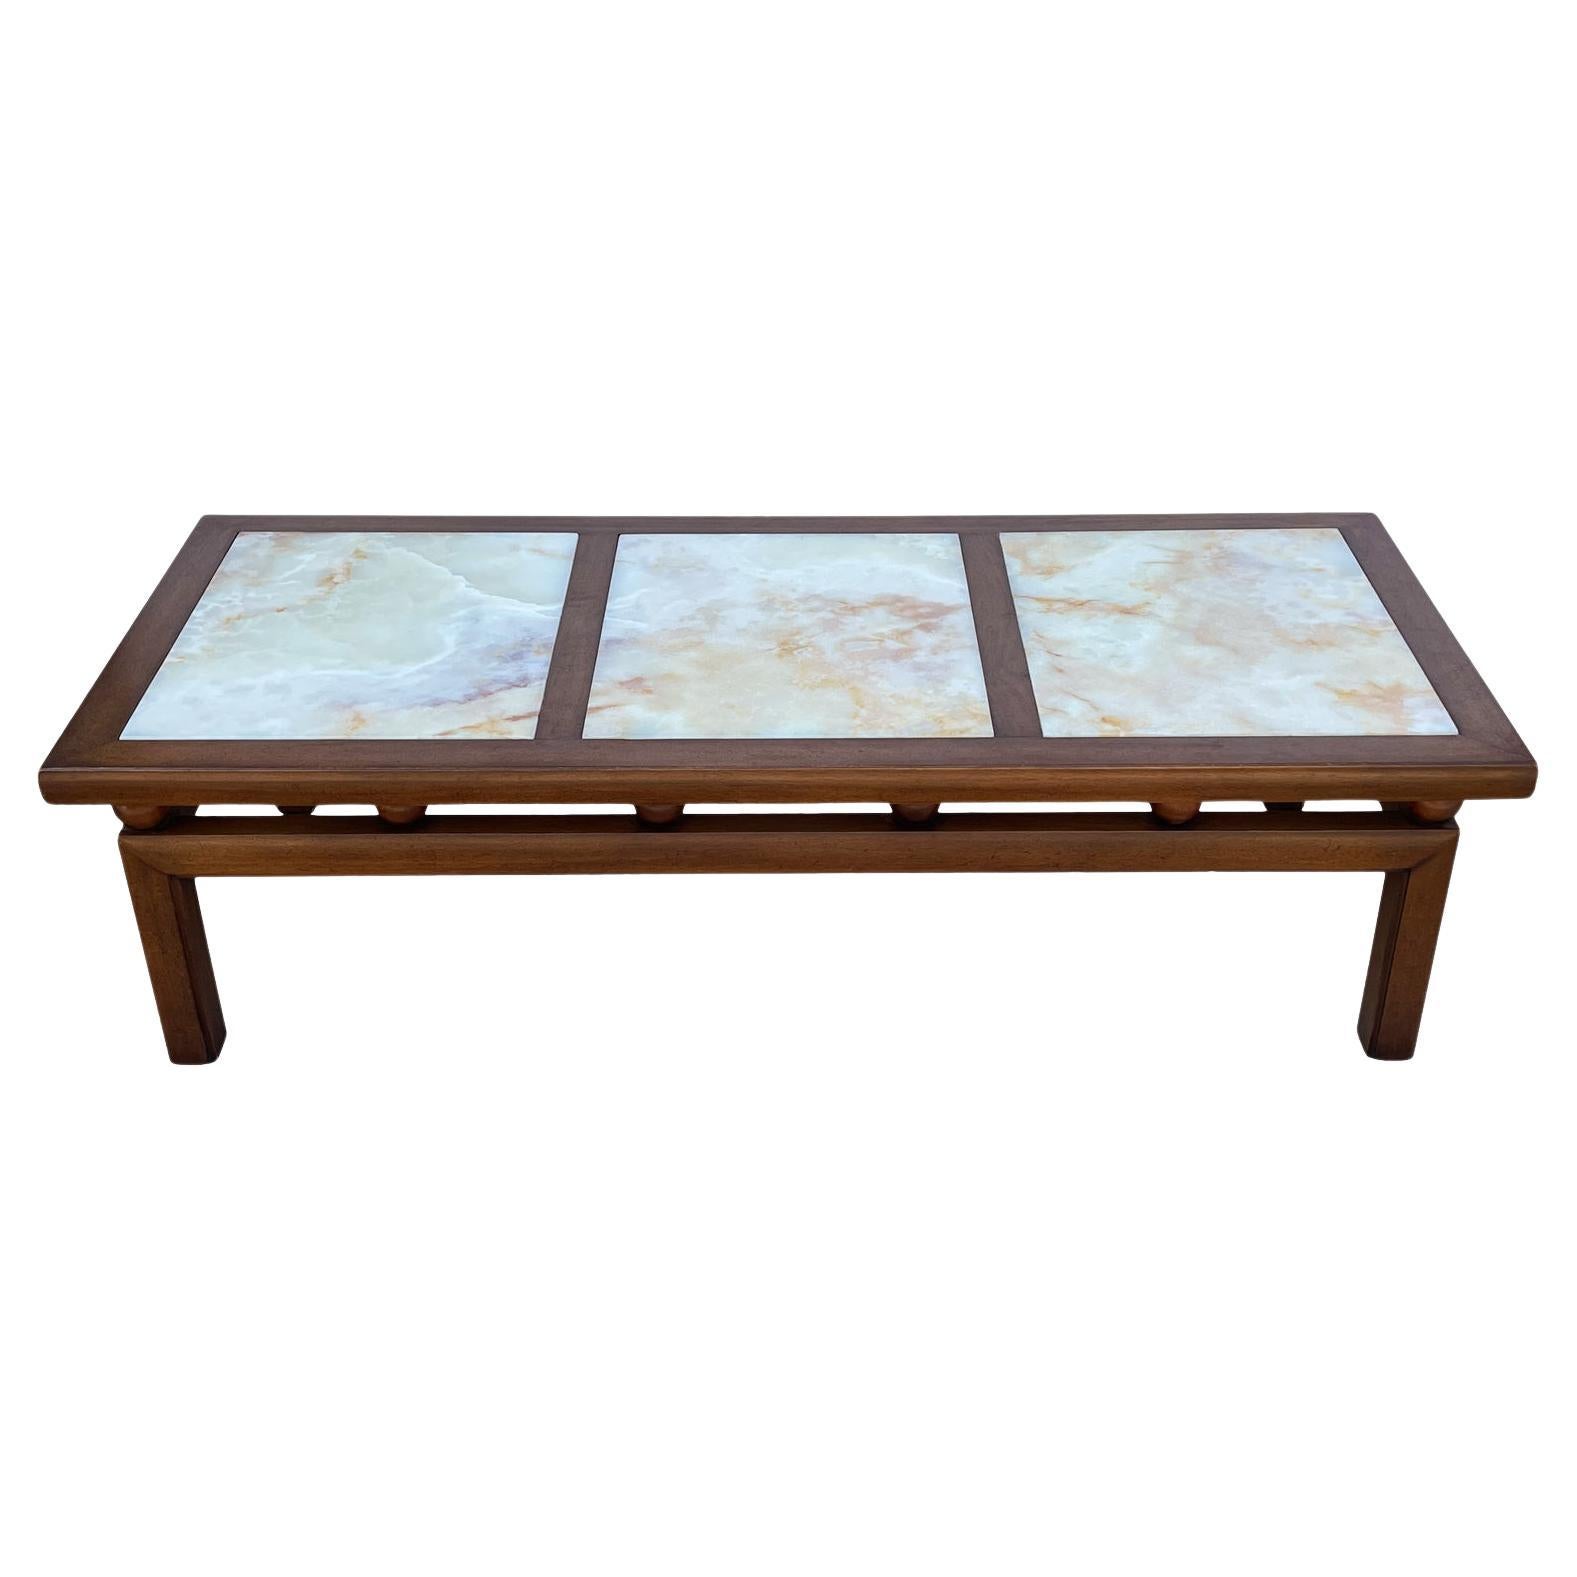 Mid-Century Modern Rectangular Cocktail Table in Walnut with Onyx Marble